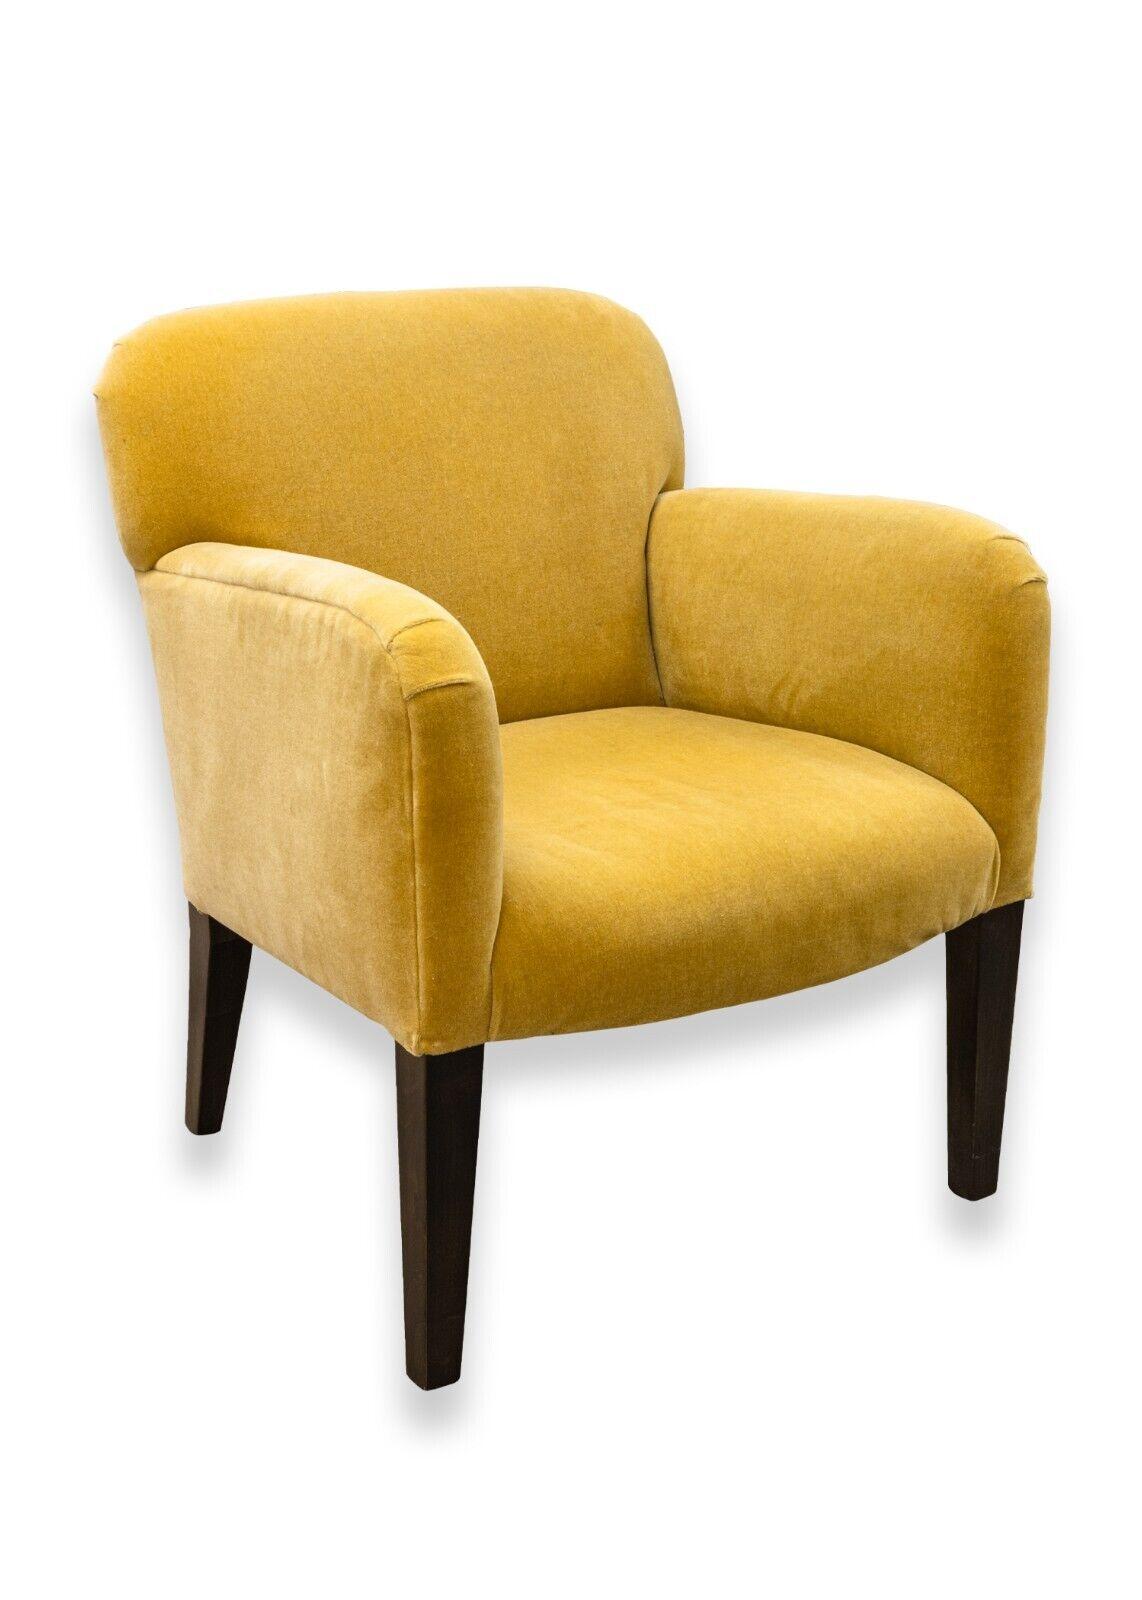 A pair of post modern yellow gold armchairs. A delightful set of armchairs with a very bright yellow/gold upholstery, black wooden legs, and super comfy cushions. These chairs are in great condition. There are some very slight scuffs and scratches